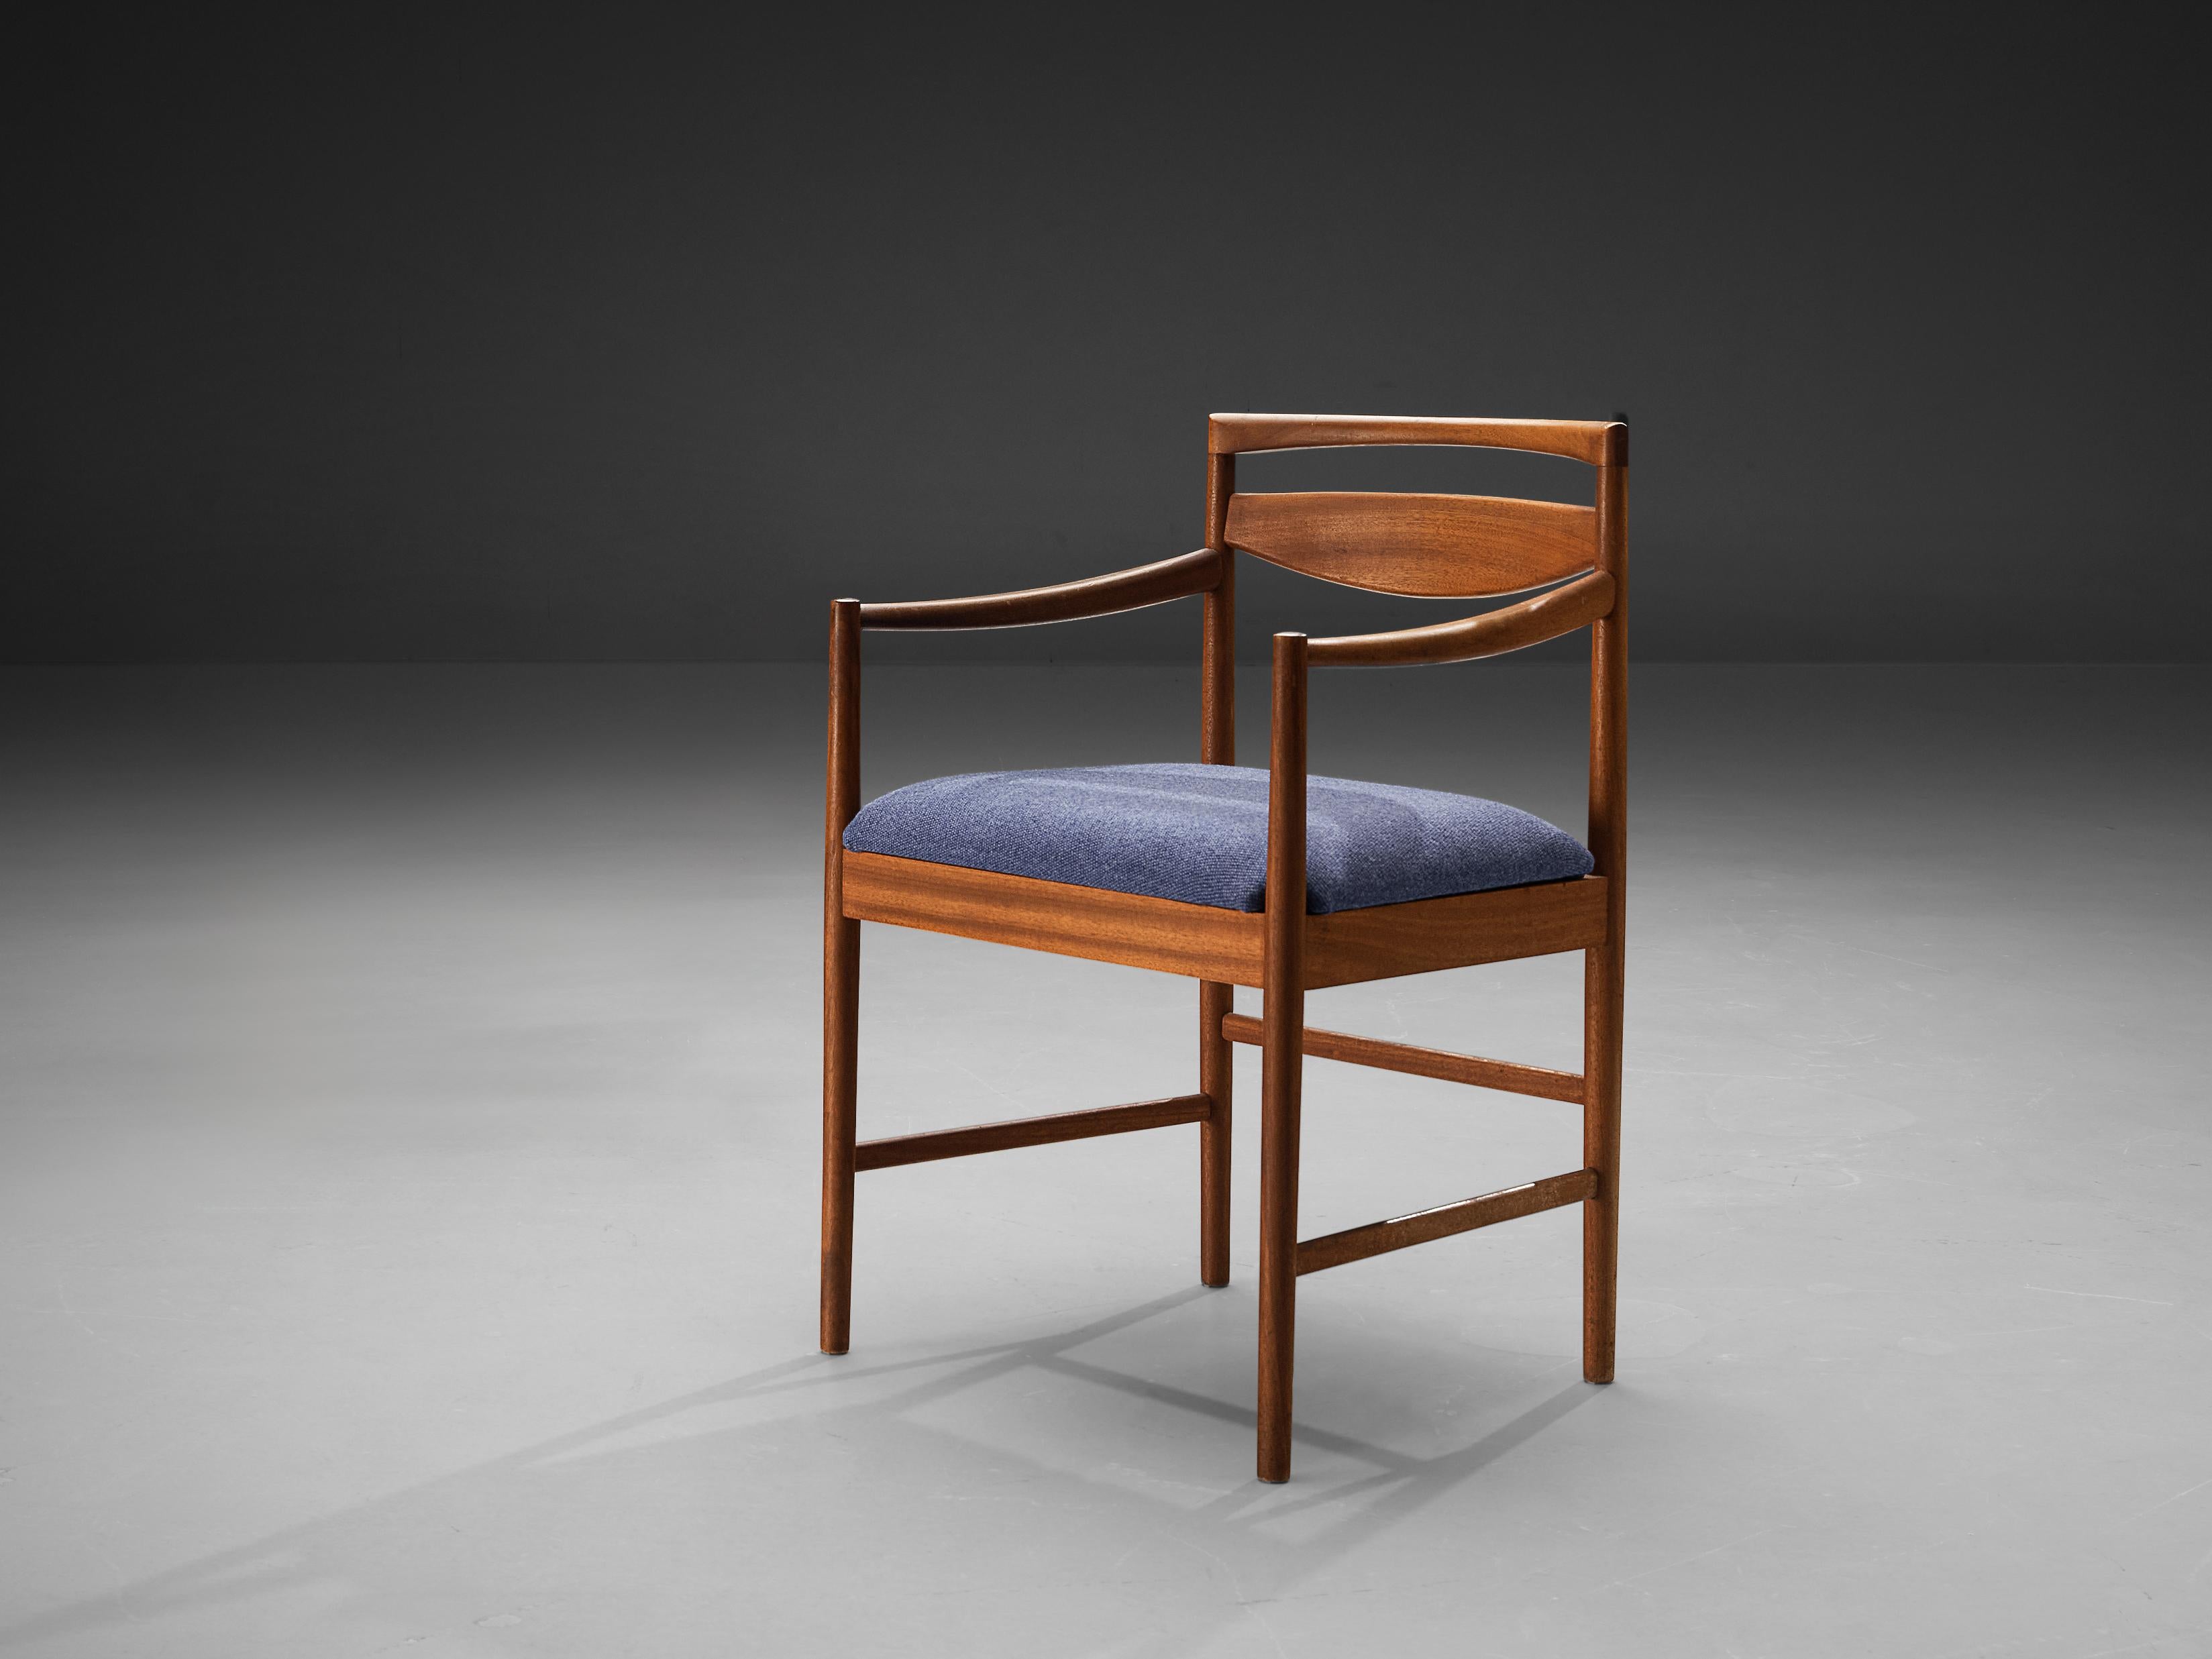 Dining chair, teak, fabric, Europe, 1960s. 

Stunning dining chair made in Europe in the 1960s featuring a striking backrest. The model is angular and modest as it is build up in mainly horizontal and vertical lines. Only the backrest is curved and